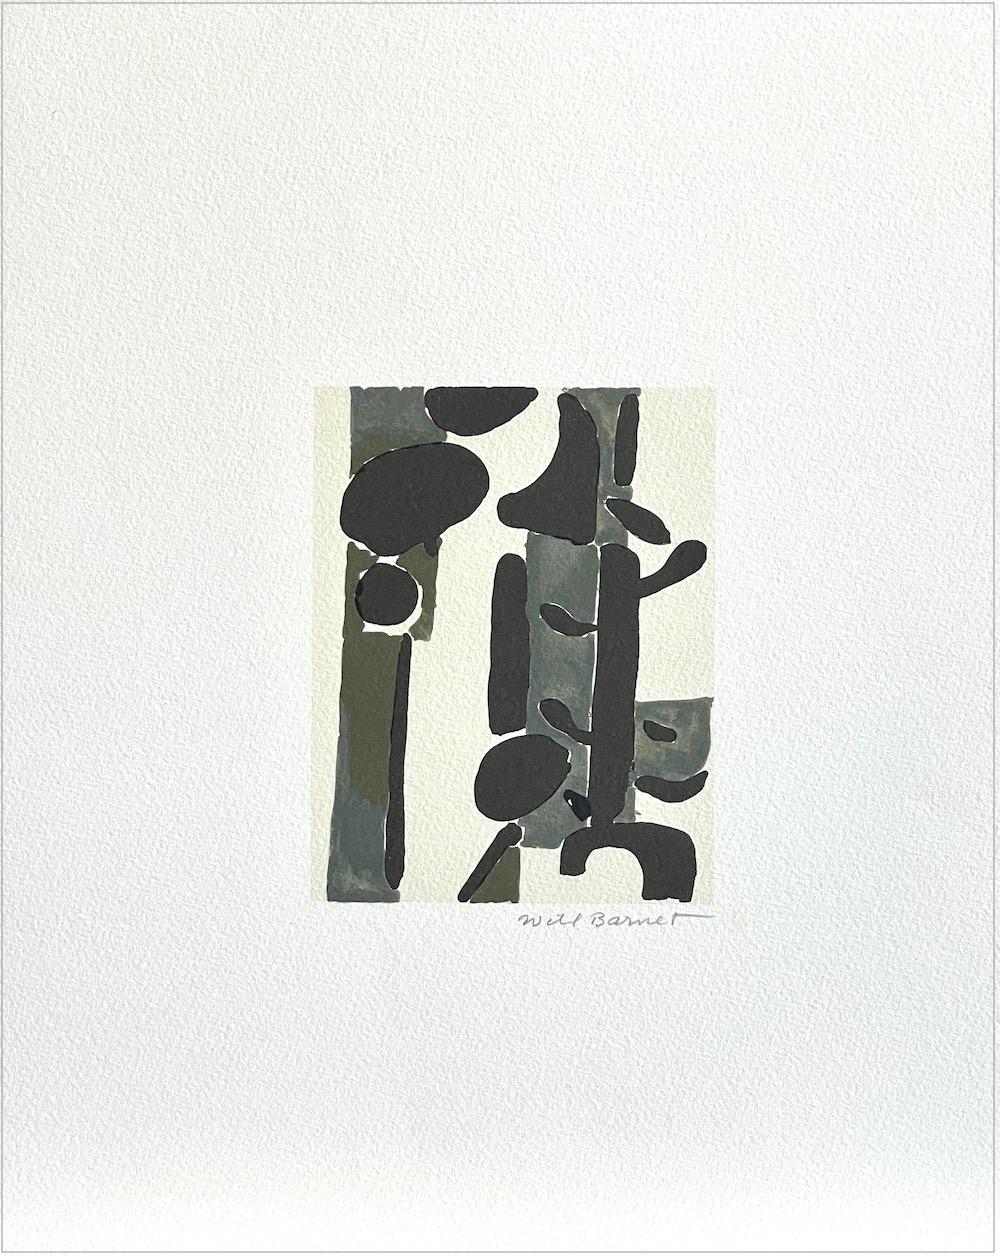 GRAY AND BLACK ABSTRACT 2002 Signed Lithograph, John Ashbery Suite A WAVE Poem - Print by Will Barnet